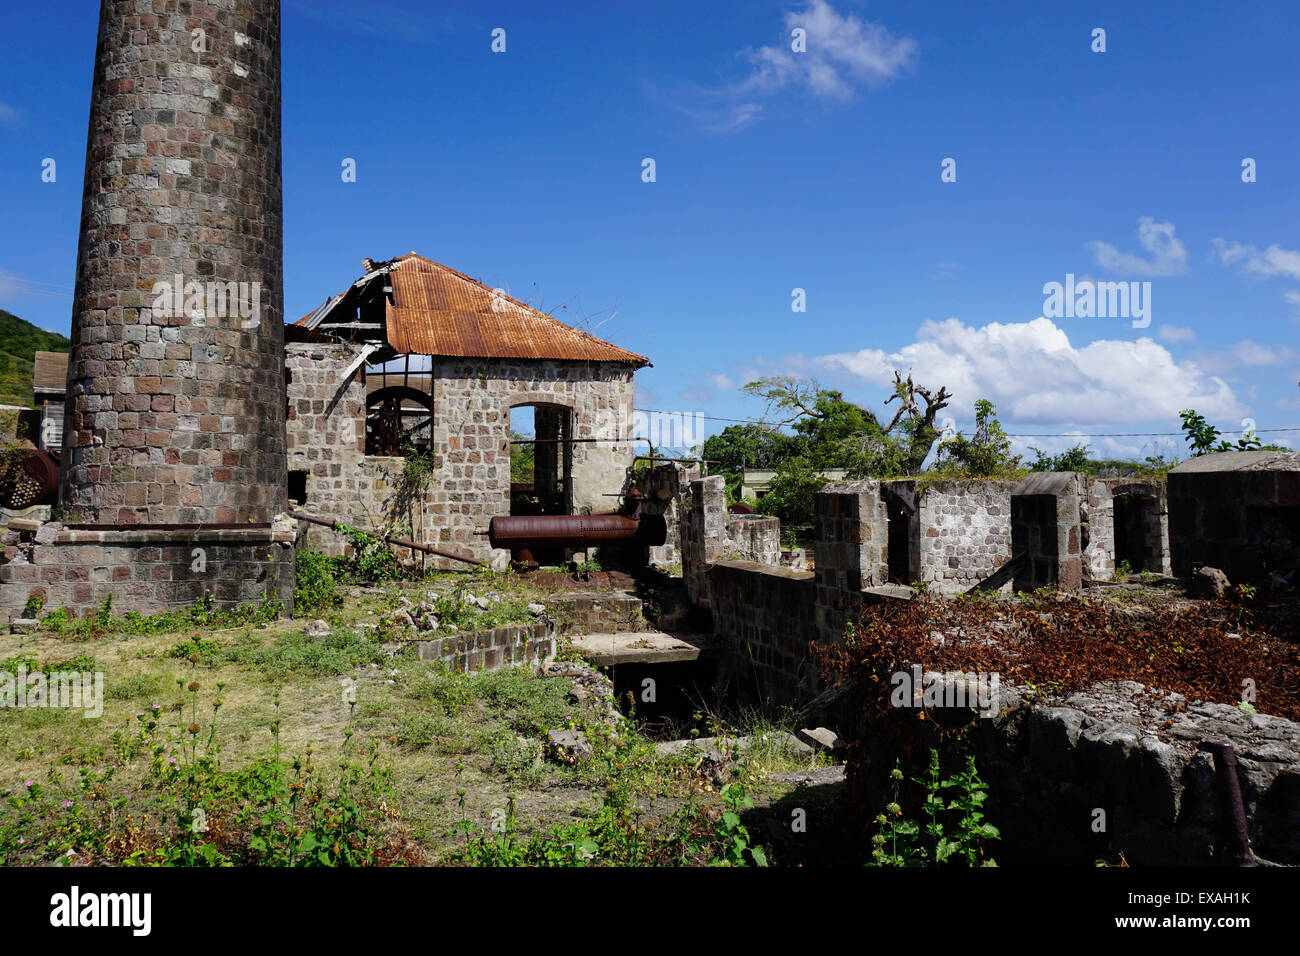 Derelict old sugar mill, Nevis, St. Kitts and Nevis, Leeward Islands, West Indies, Caribbean, Central America Stock Photo